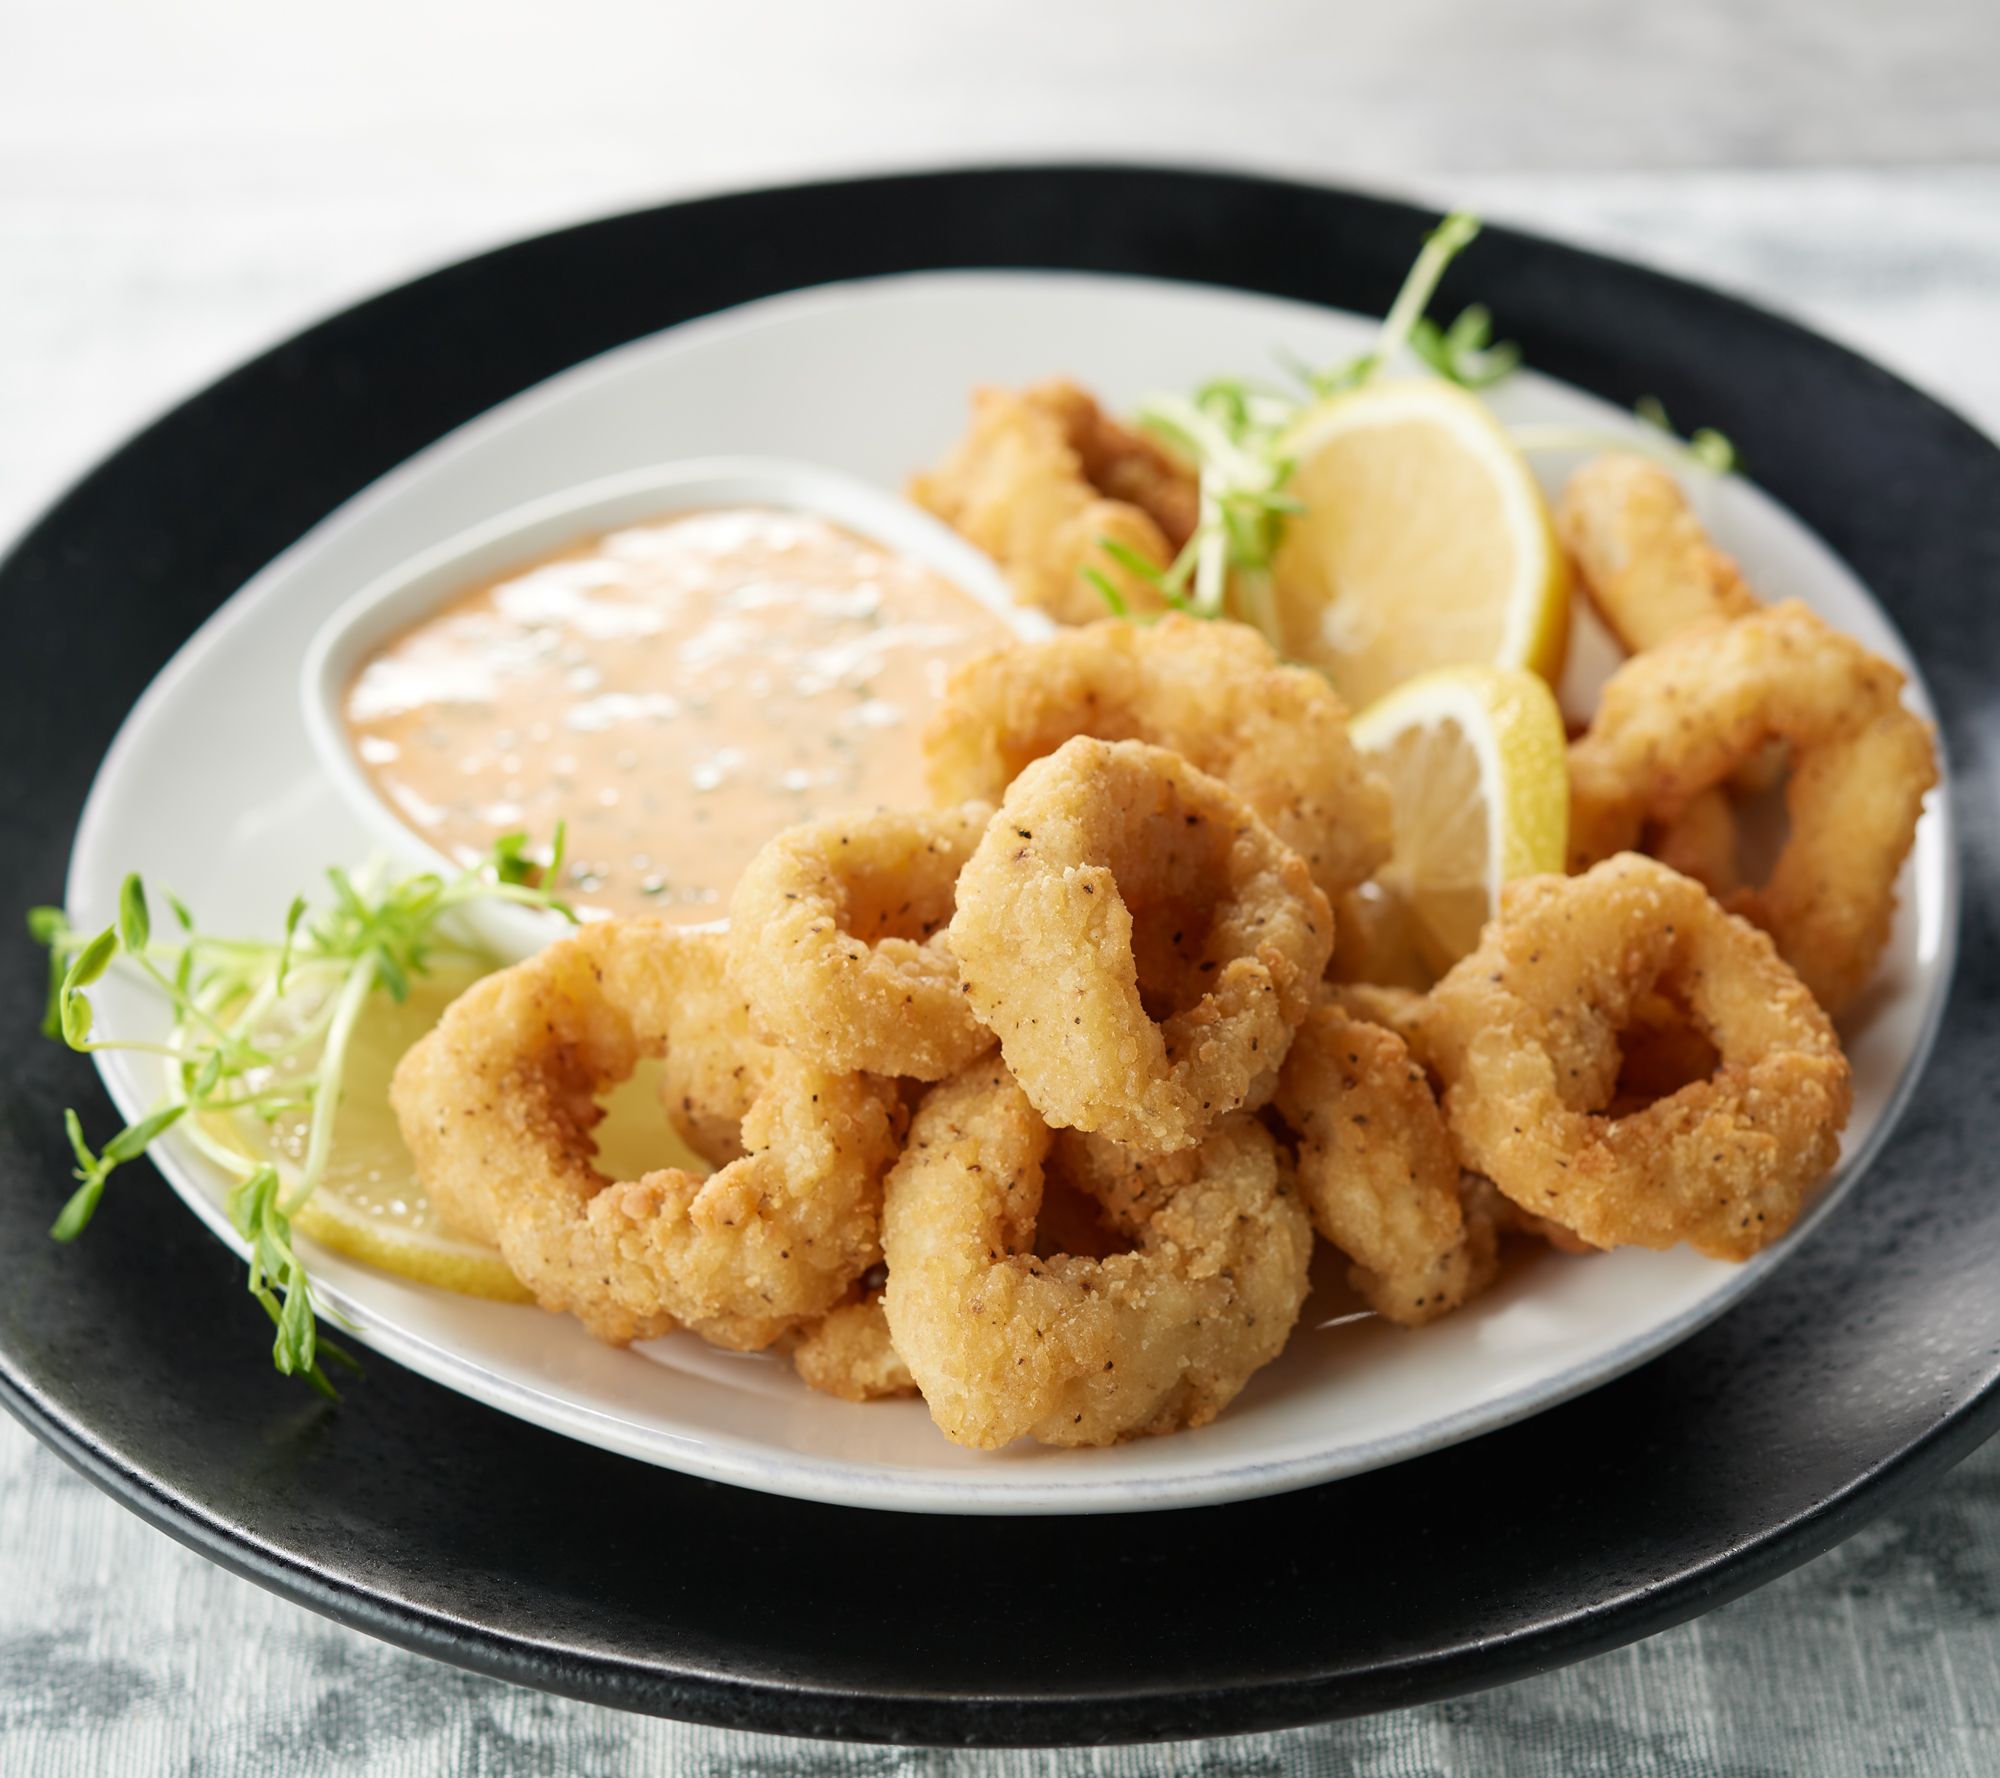 Bos'n Frozen Seafood Raw Giant Calamari Rings, Fully Cleaned And